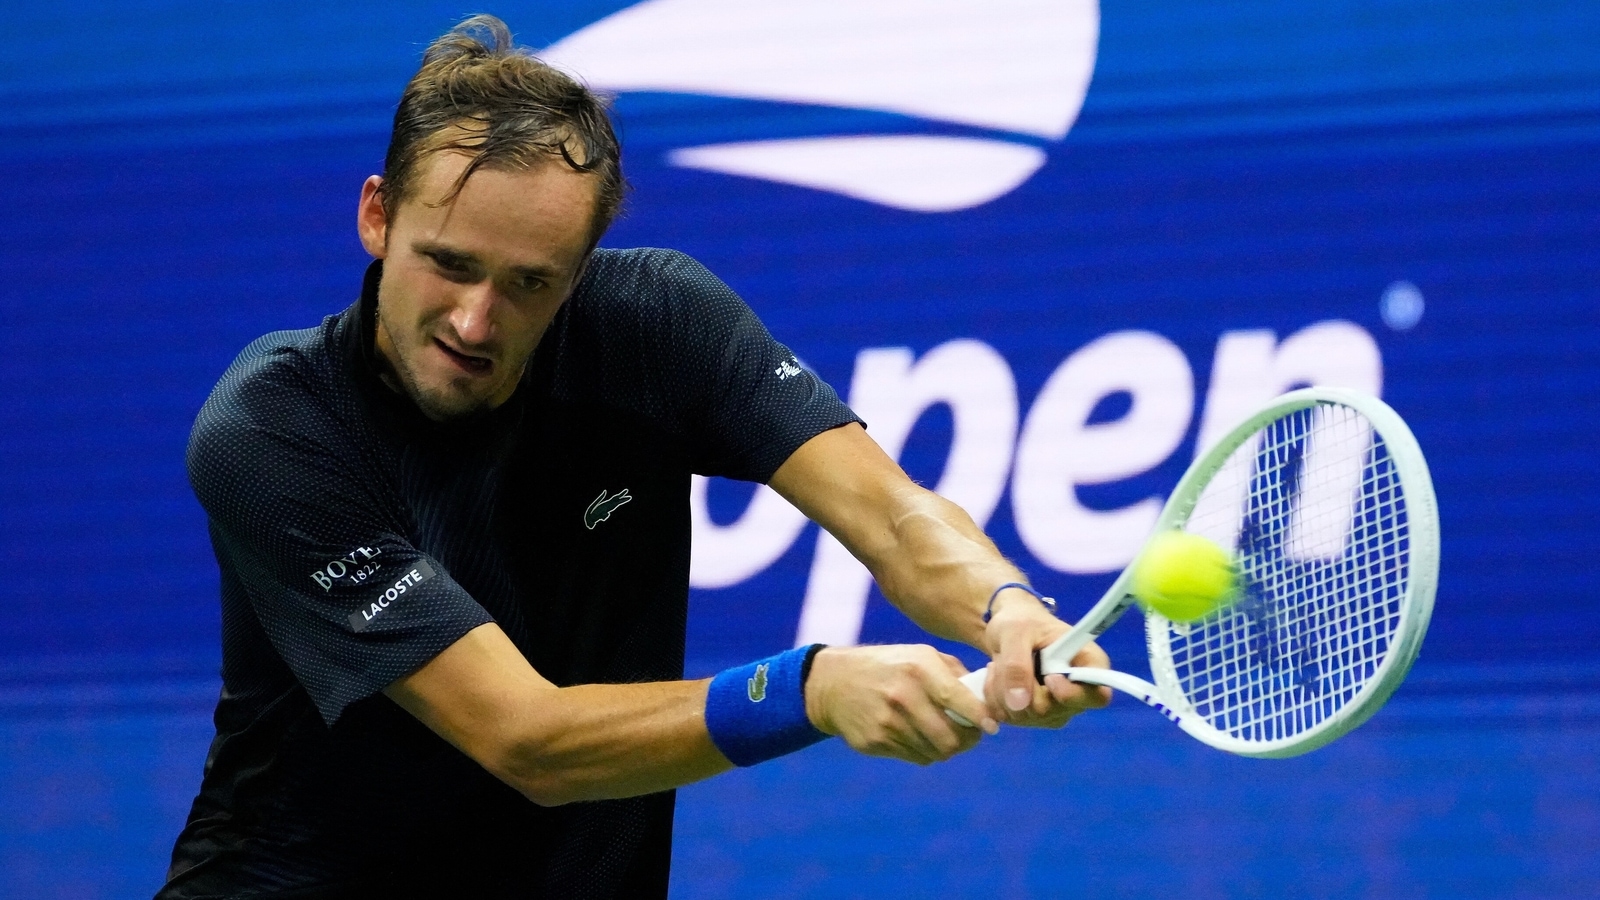 Daniil Medvedev crashes out of US Open, loses to Nick Kyrgios in round-of-16